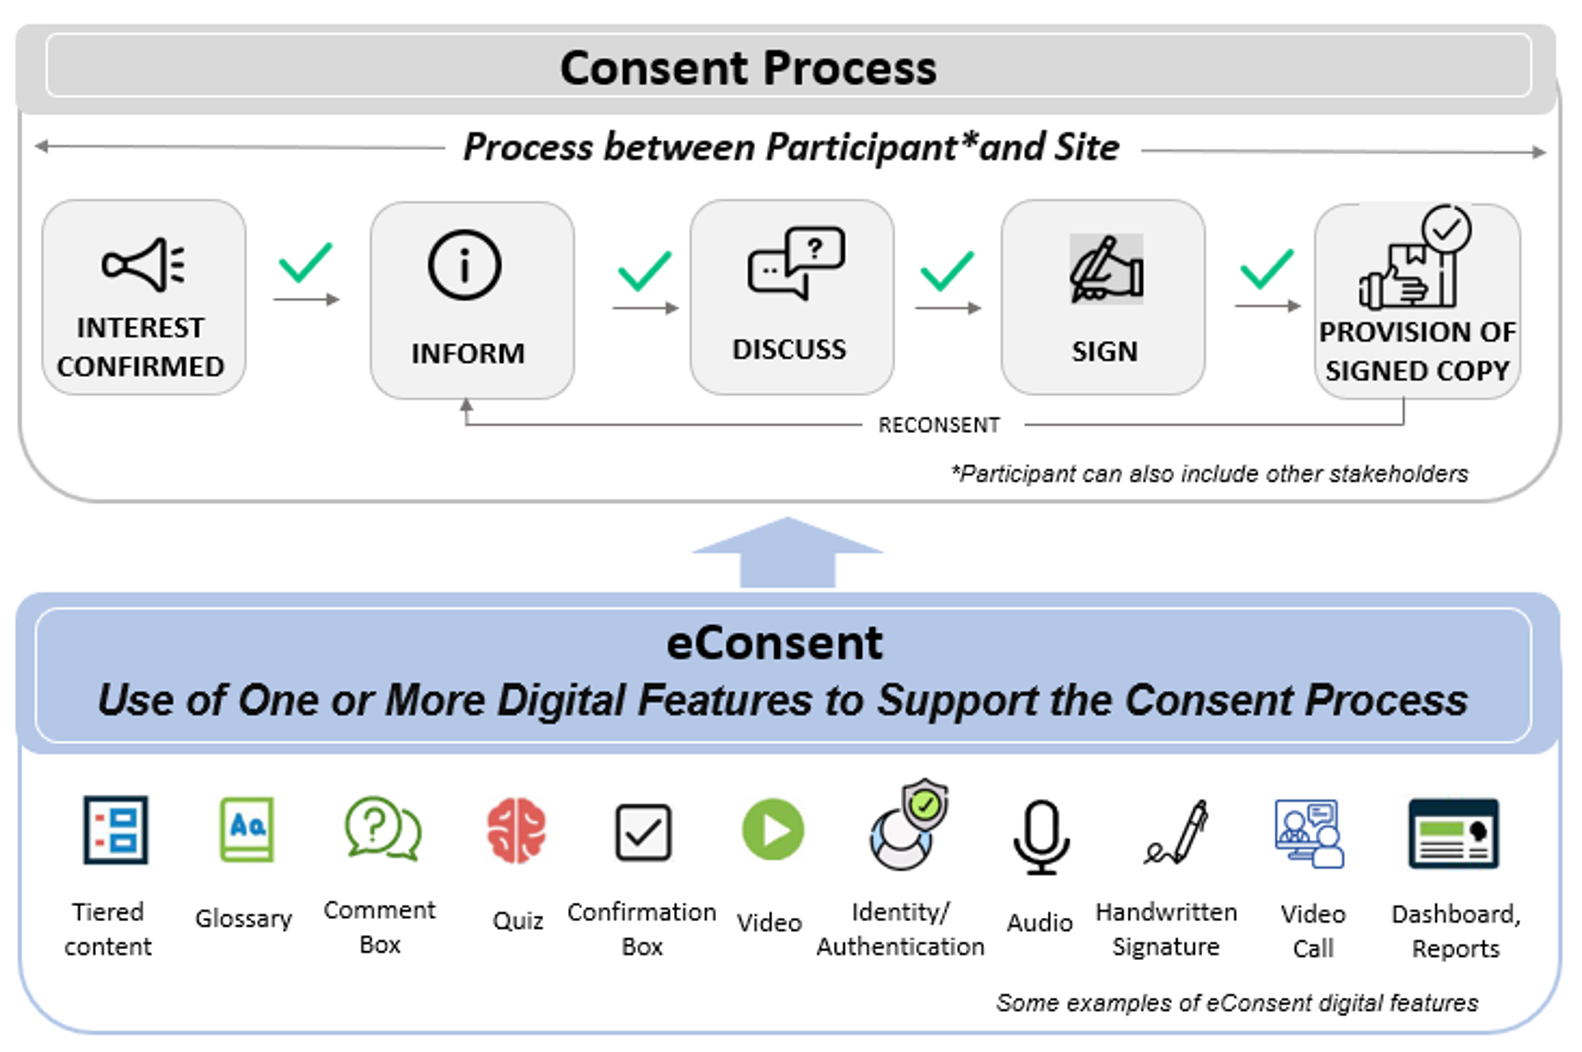 Figure 1. eConsent Definition and Some Examples of eConsent Digital Features.